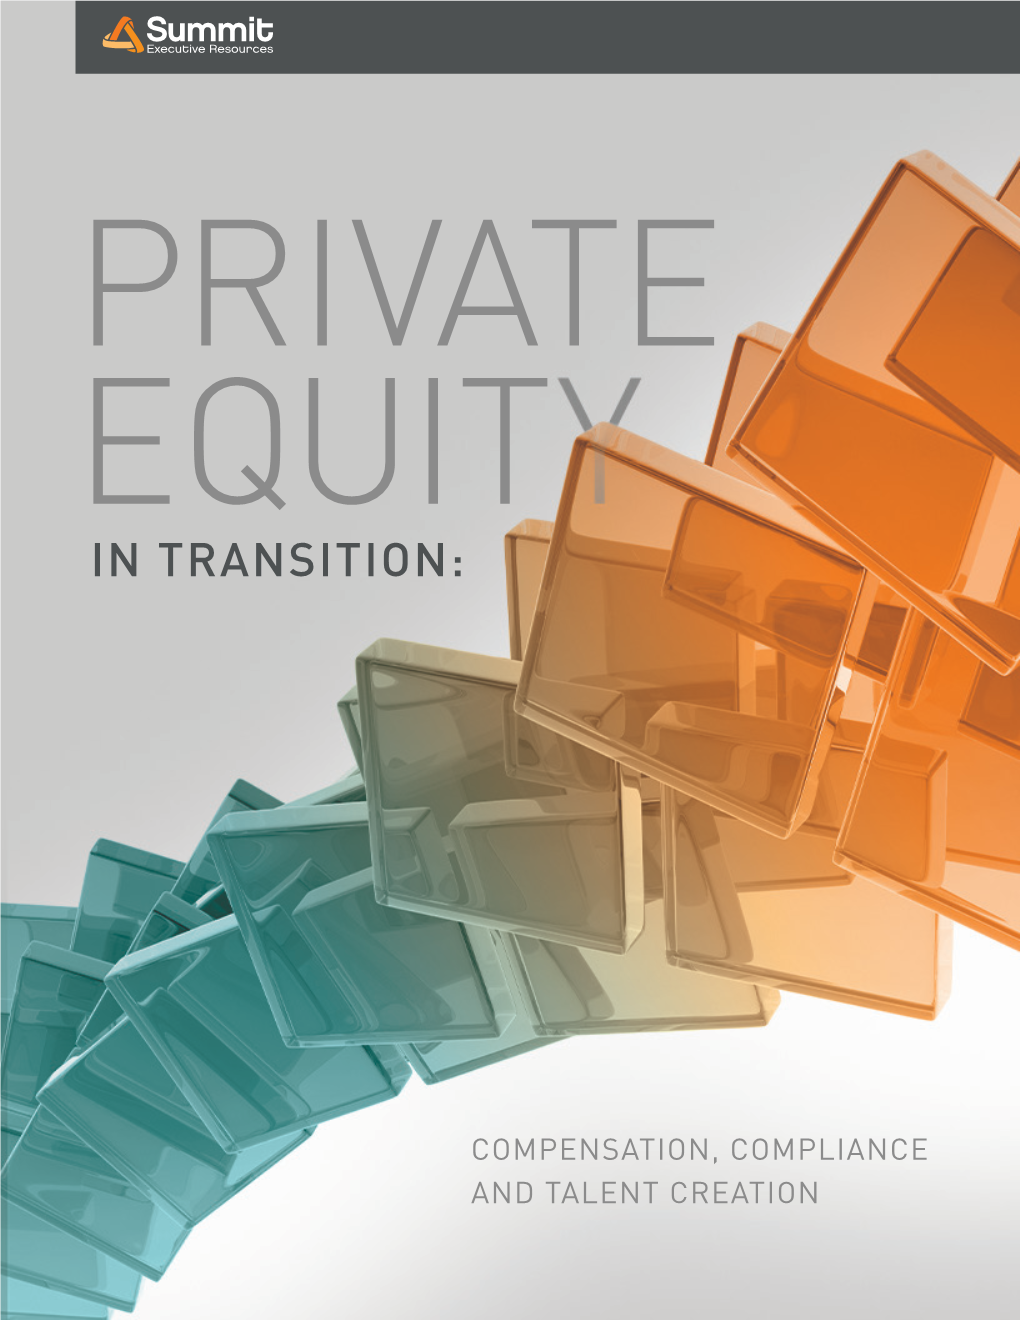 PRIVATE EQUITY in TRANSITION: COMPENSATION, COMPLIANCE and TALENT CREATION Introduction